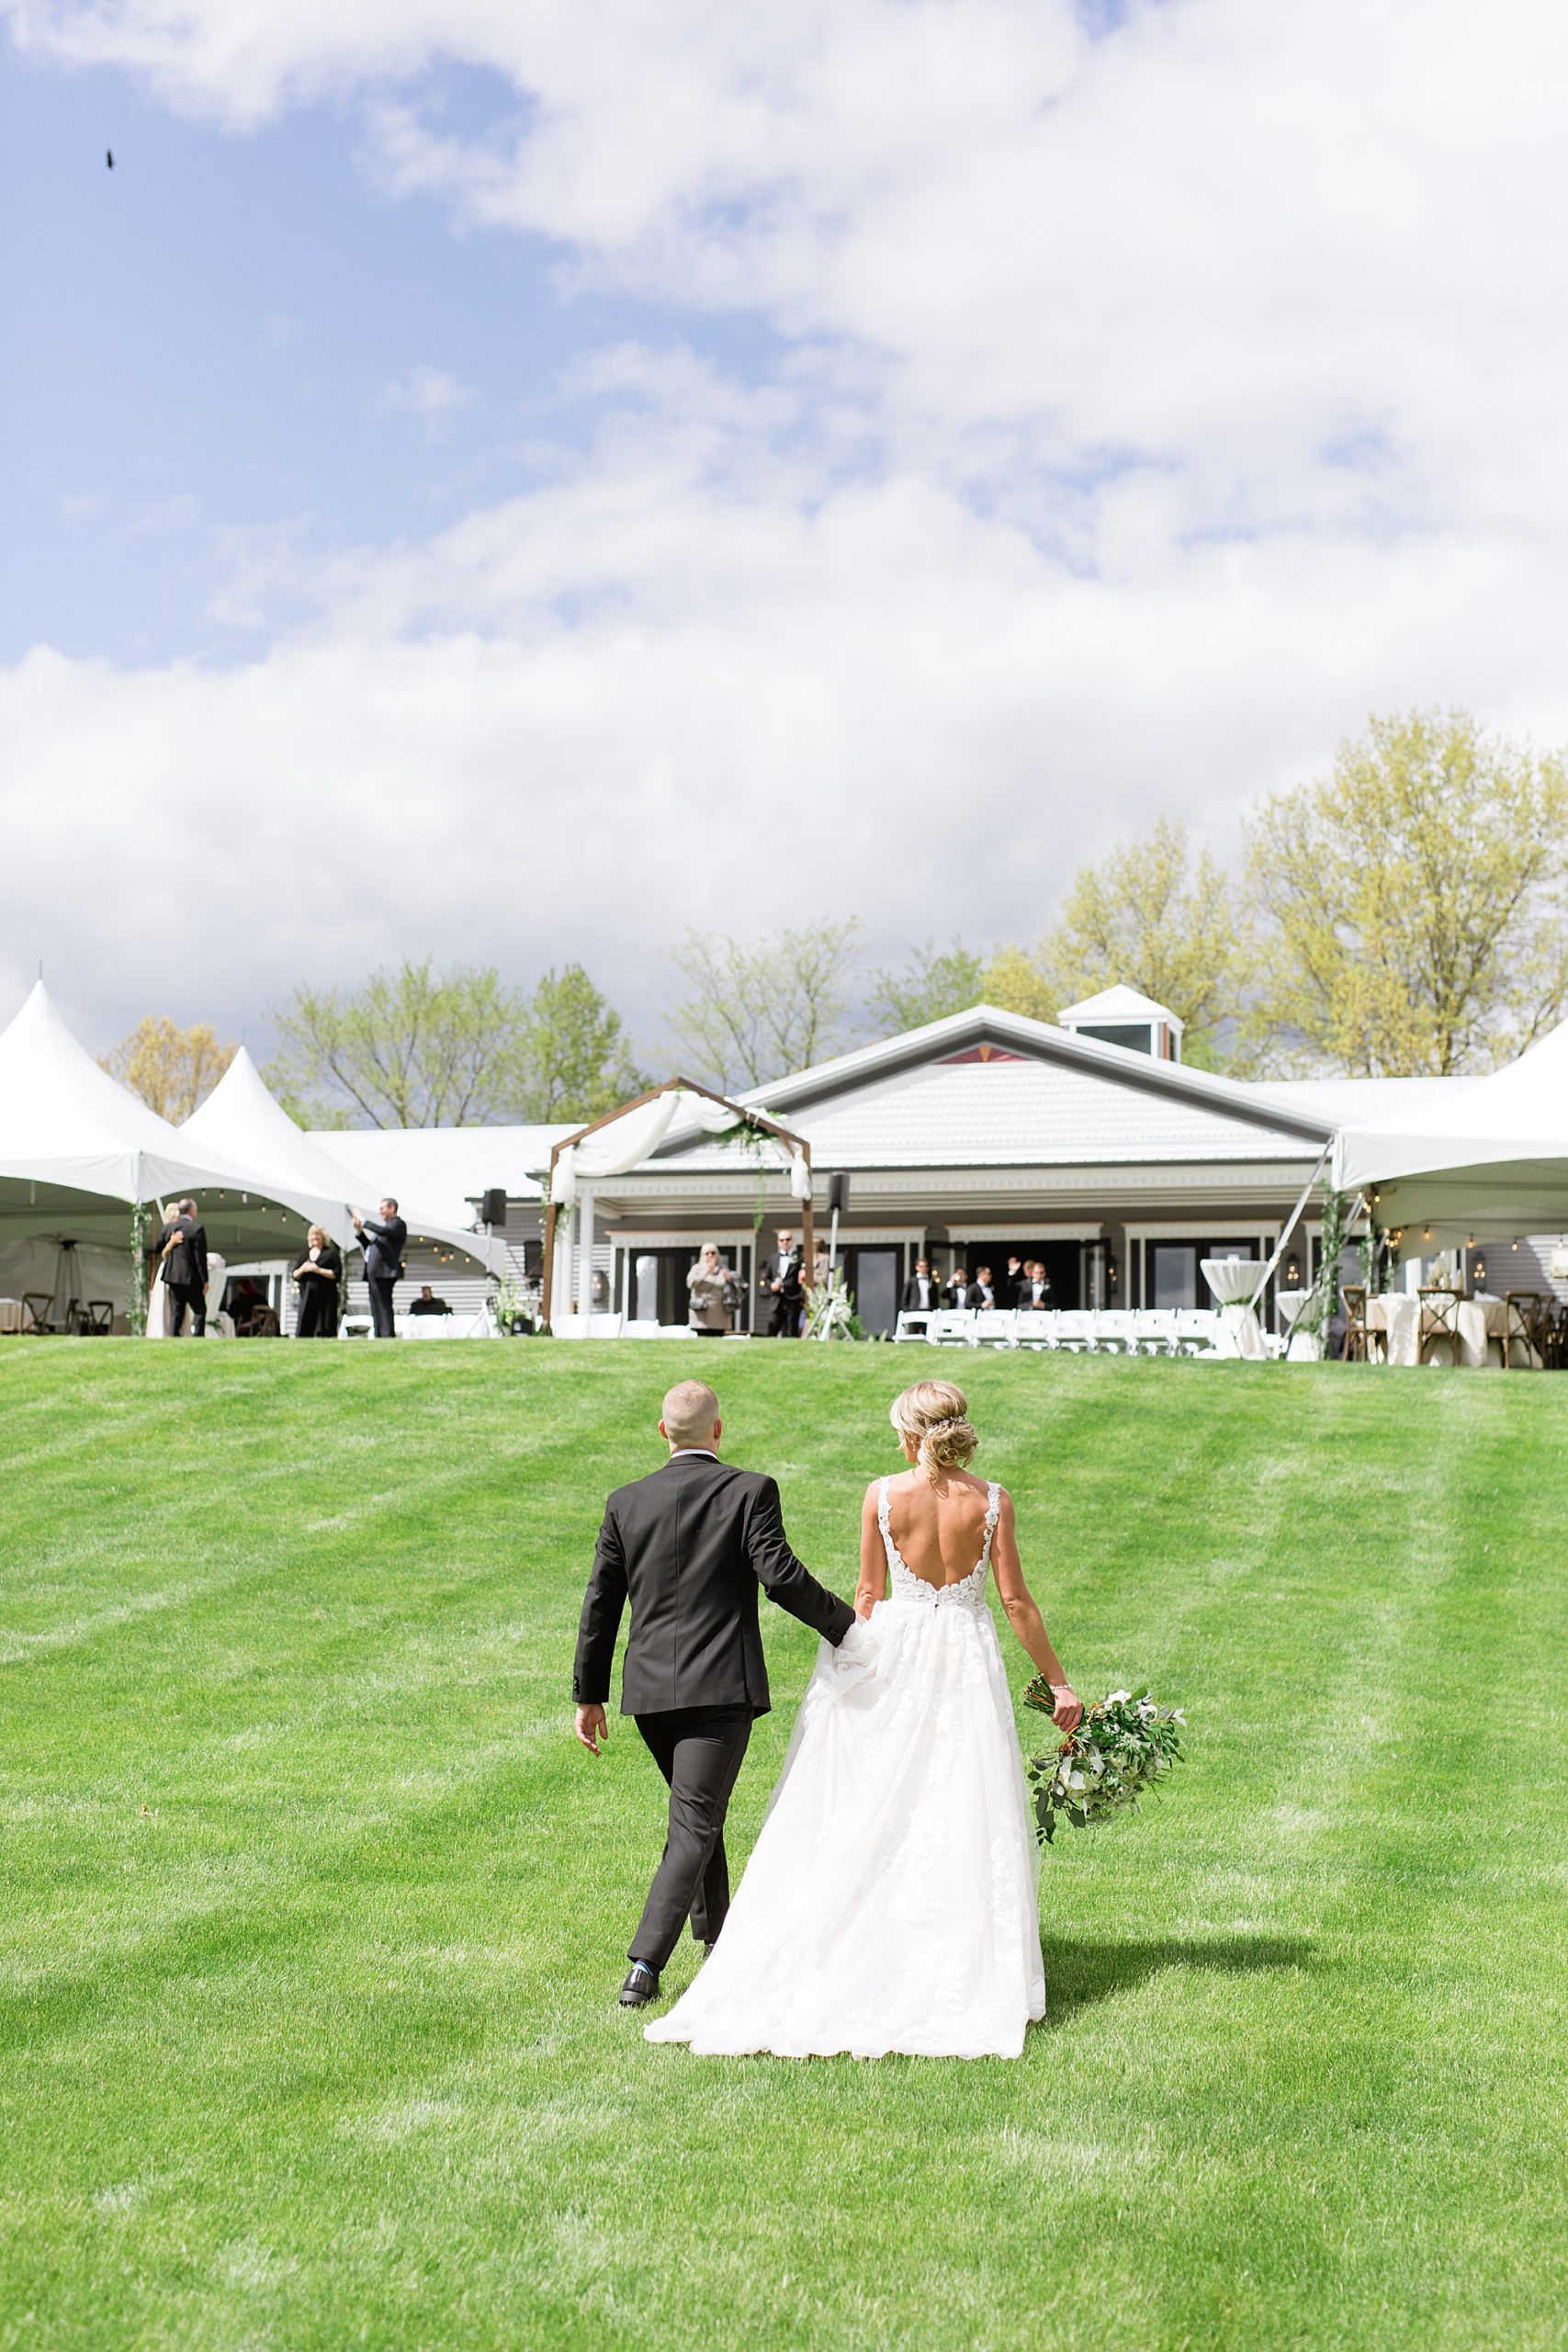 A romantic late Spring wedding at The Oakley in Holly, Michigan by Breanne Rochelle Photography.